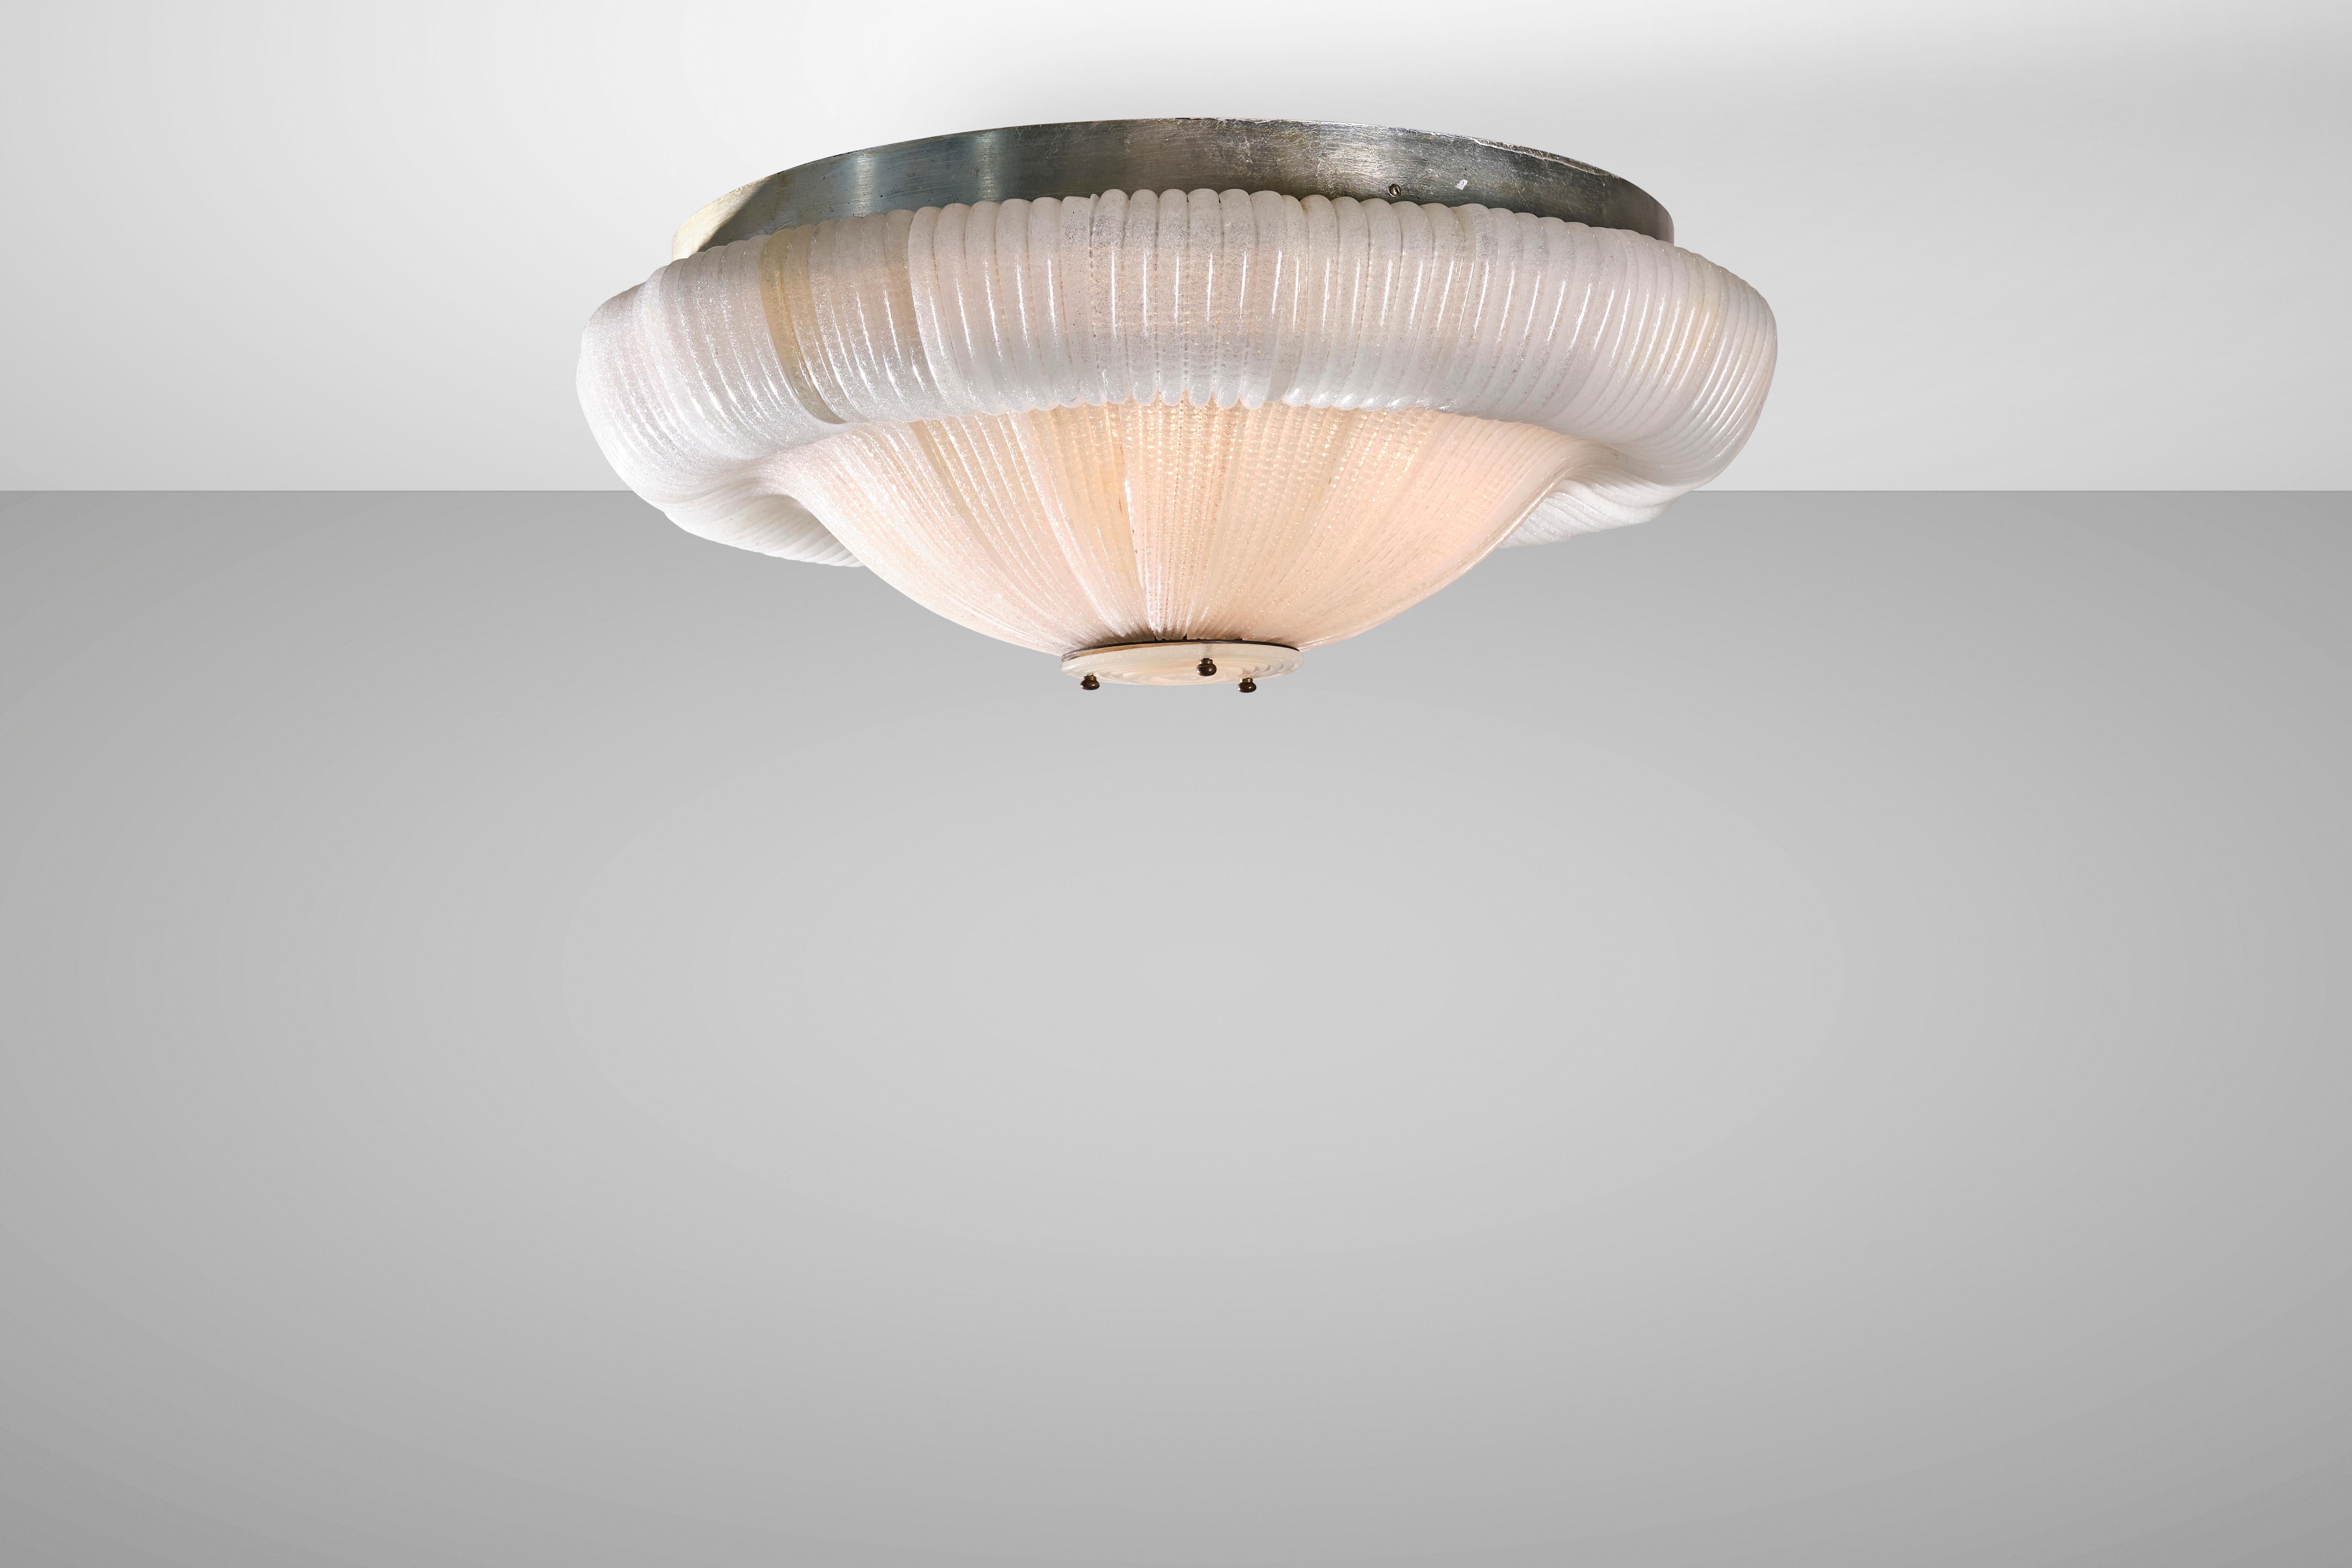 Elegant and timeless, Murano glass ceiling lamps are varied and diverse but each carries with it the aura of the wisdom of the lagoon's master glassmakers. This chandelier created by Venini in the 1940s is made of metal and brass with Cordonato